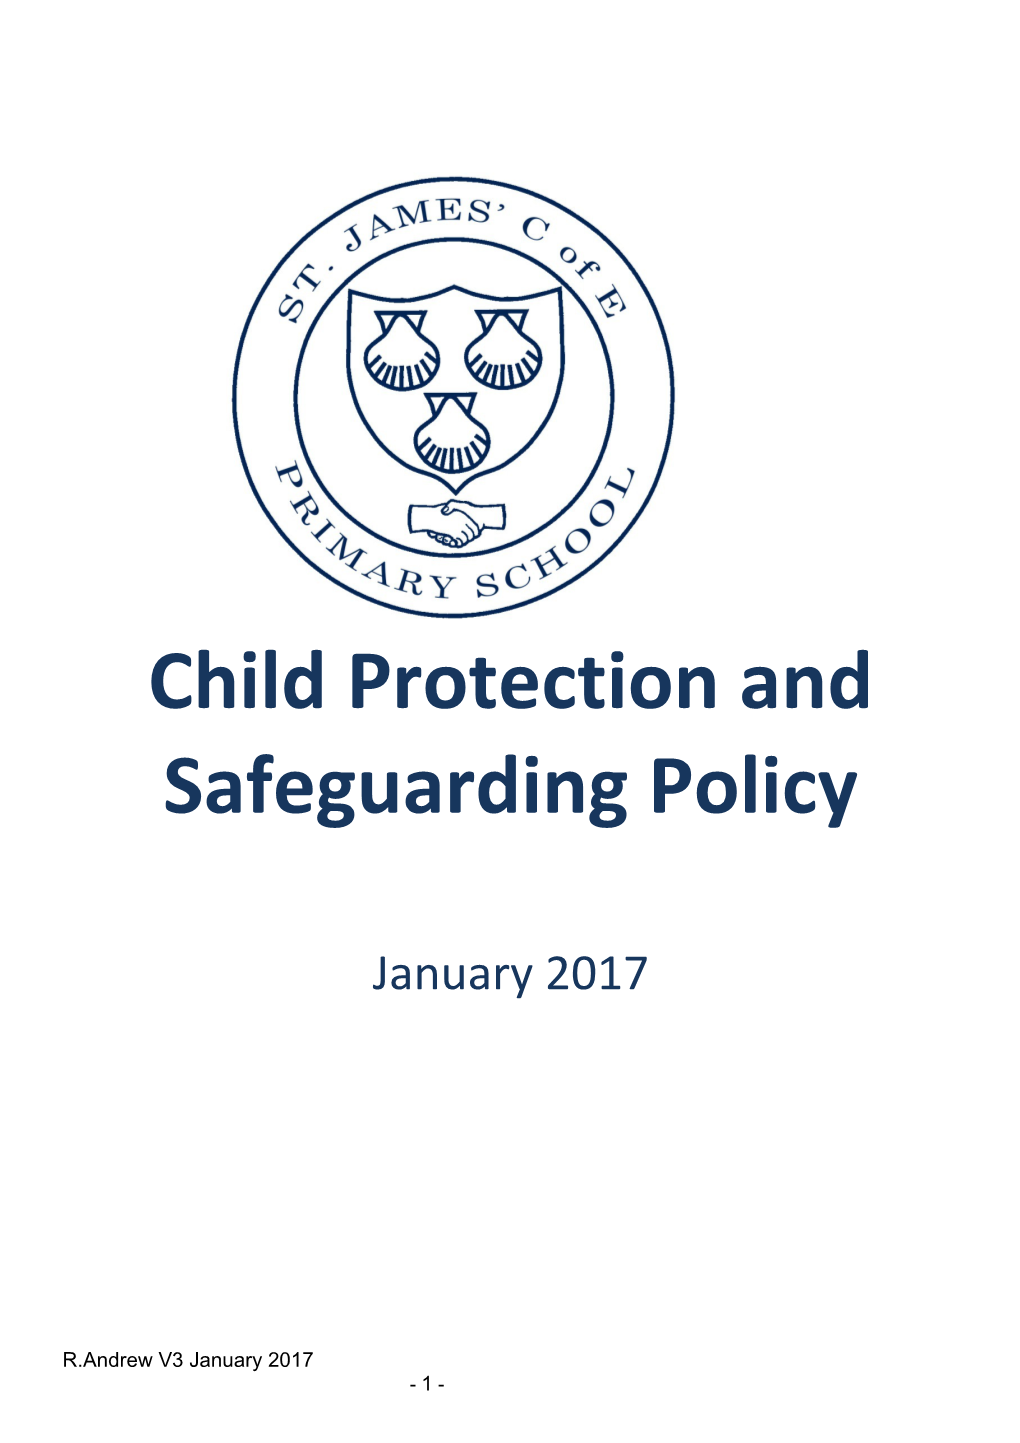 Templates for School Child Protection Policy s1